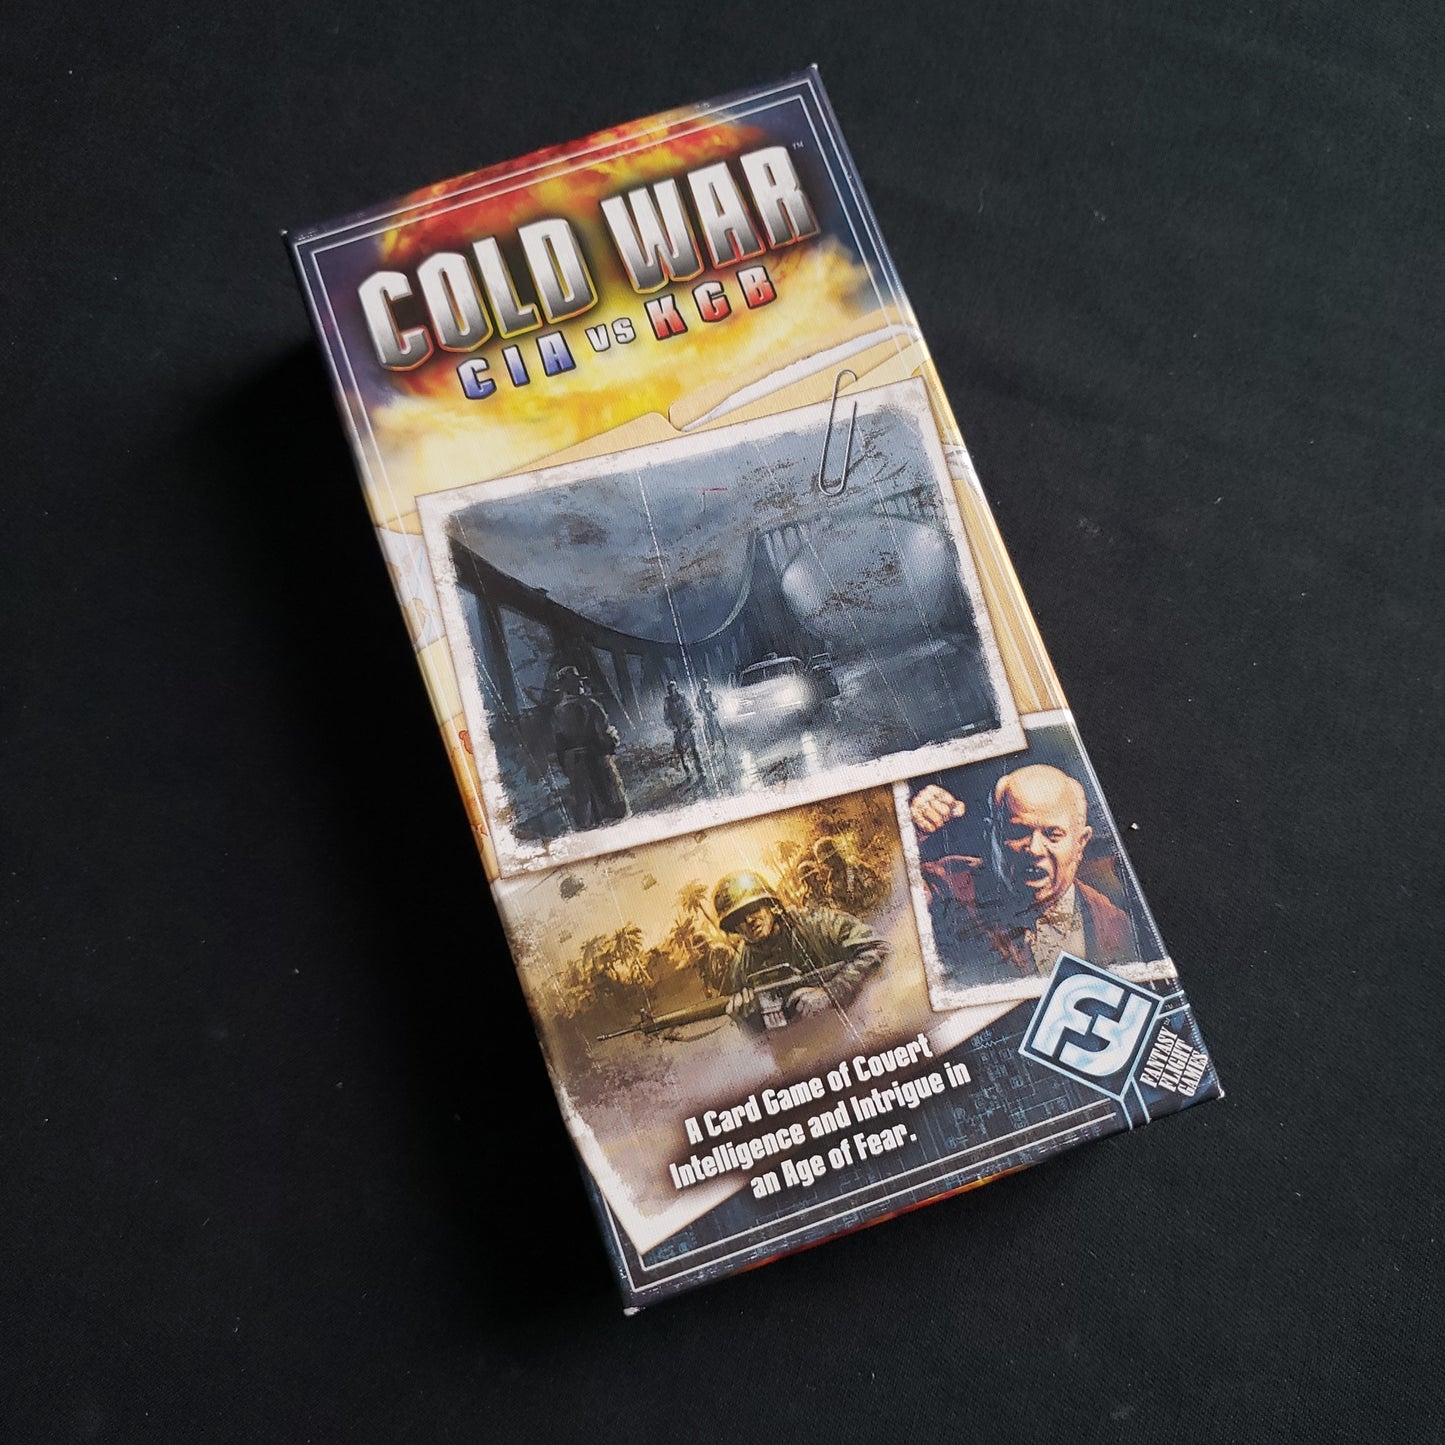 Image shows the front cover of the box of the Cold War: CIA vs KGB card game